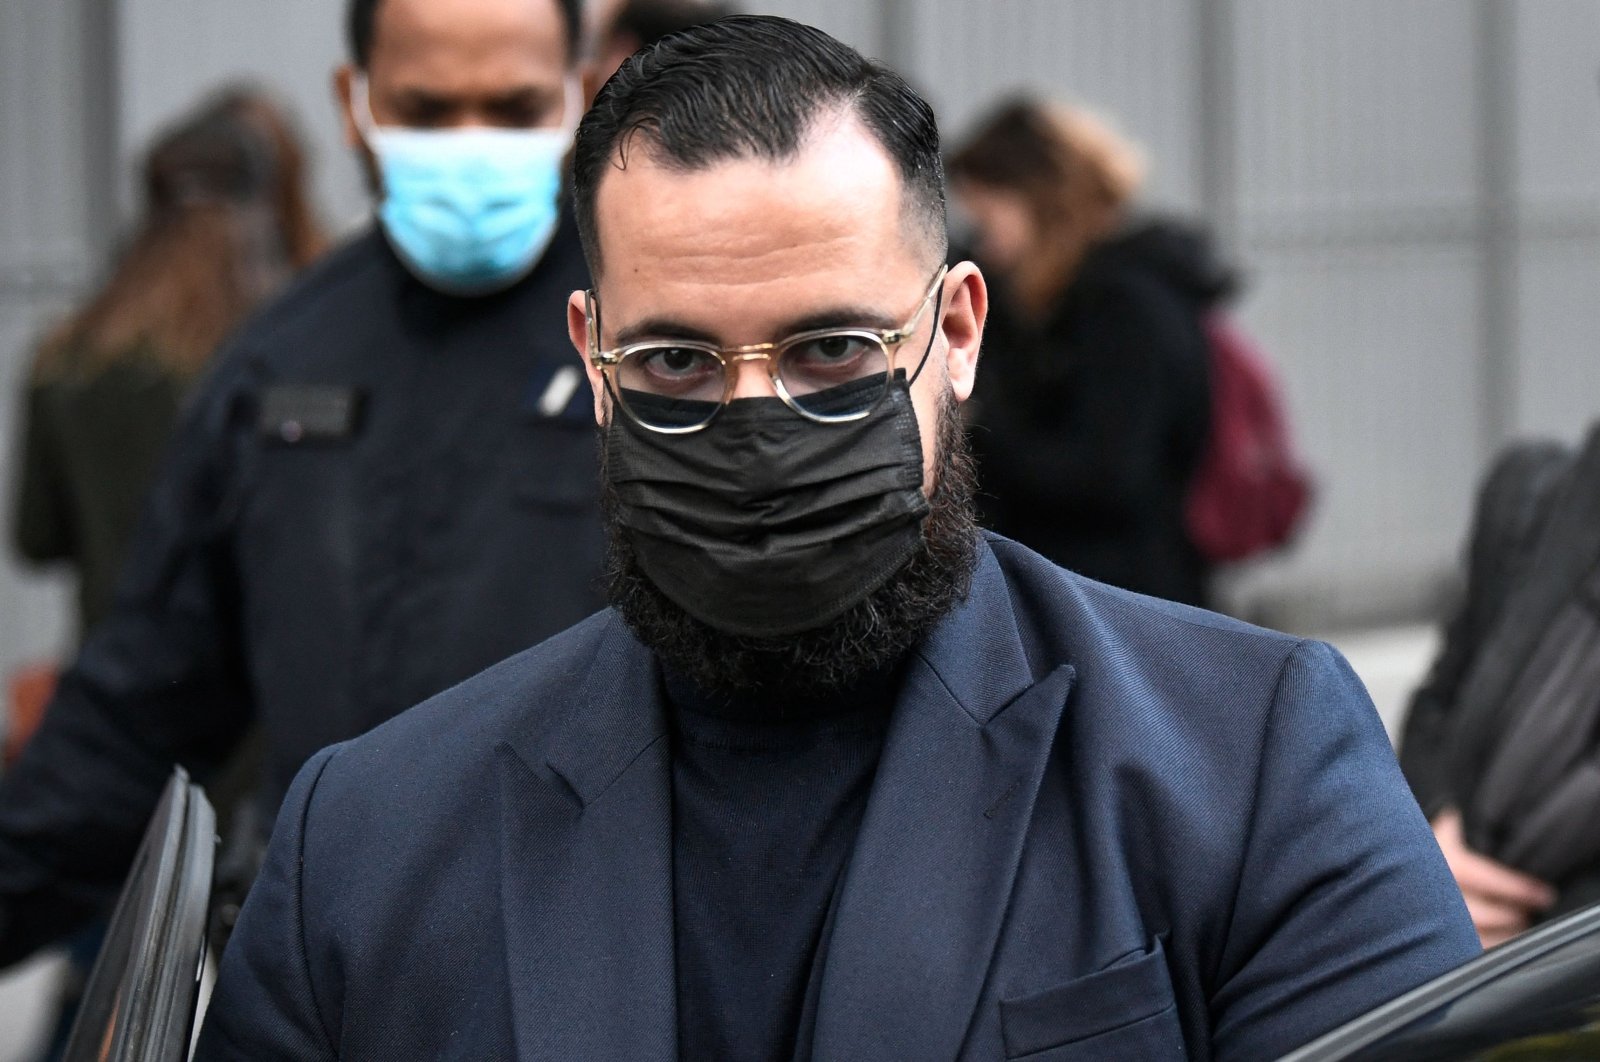 Alexandre Benalla leaves the courthouse in Paris after hearing the verdict in his trial on charges of assaulting a young couple during a May Day protest in 2018 when he was the French president&#039;s bodyguard, Nov. 5, 2021. (AFP File Photo)